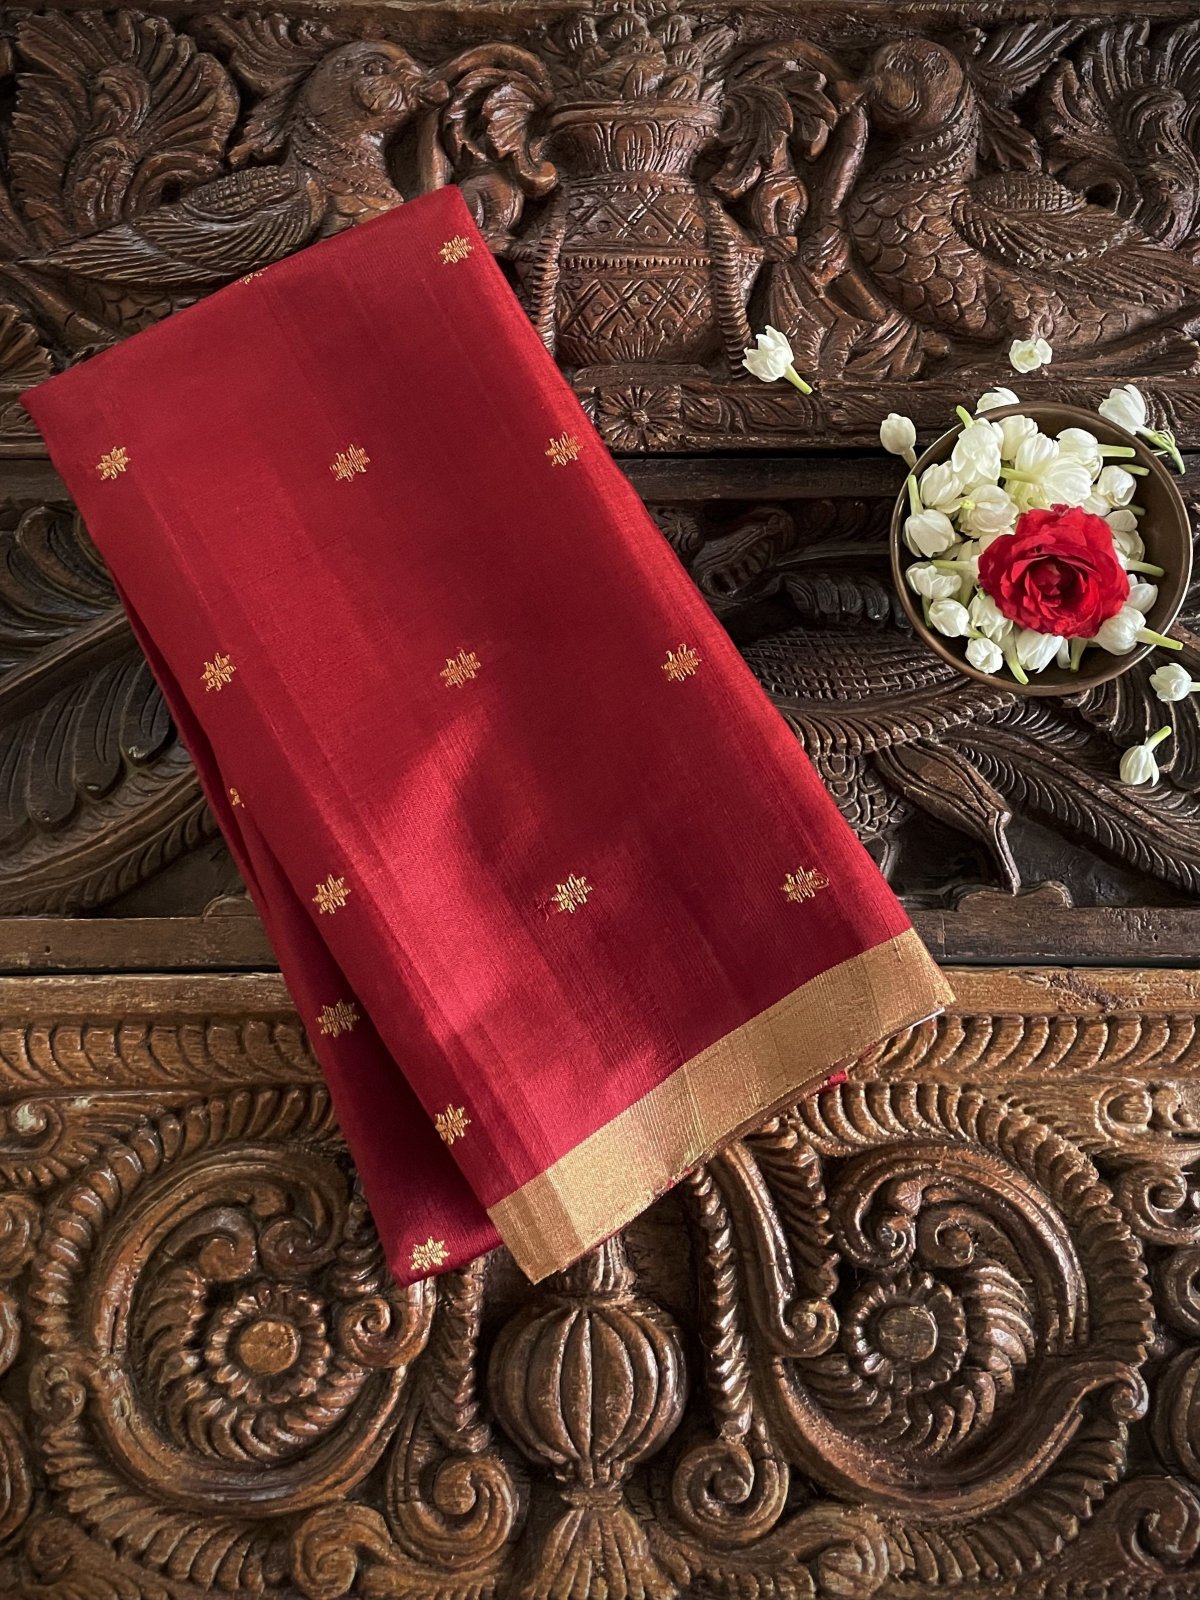 Rust Red Chanderi Silk Blouse With Gold Zari Floral Buttis